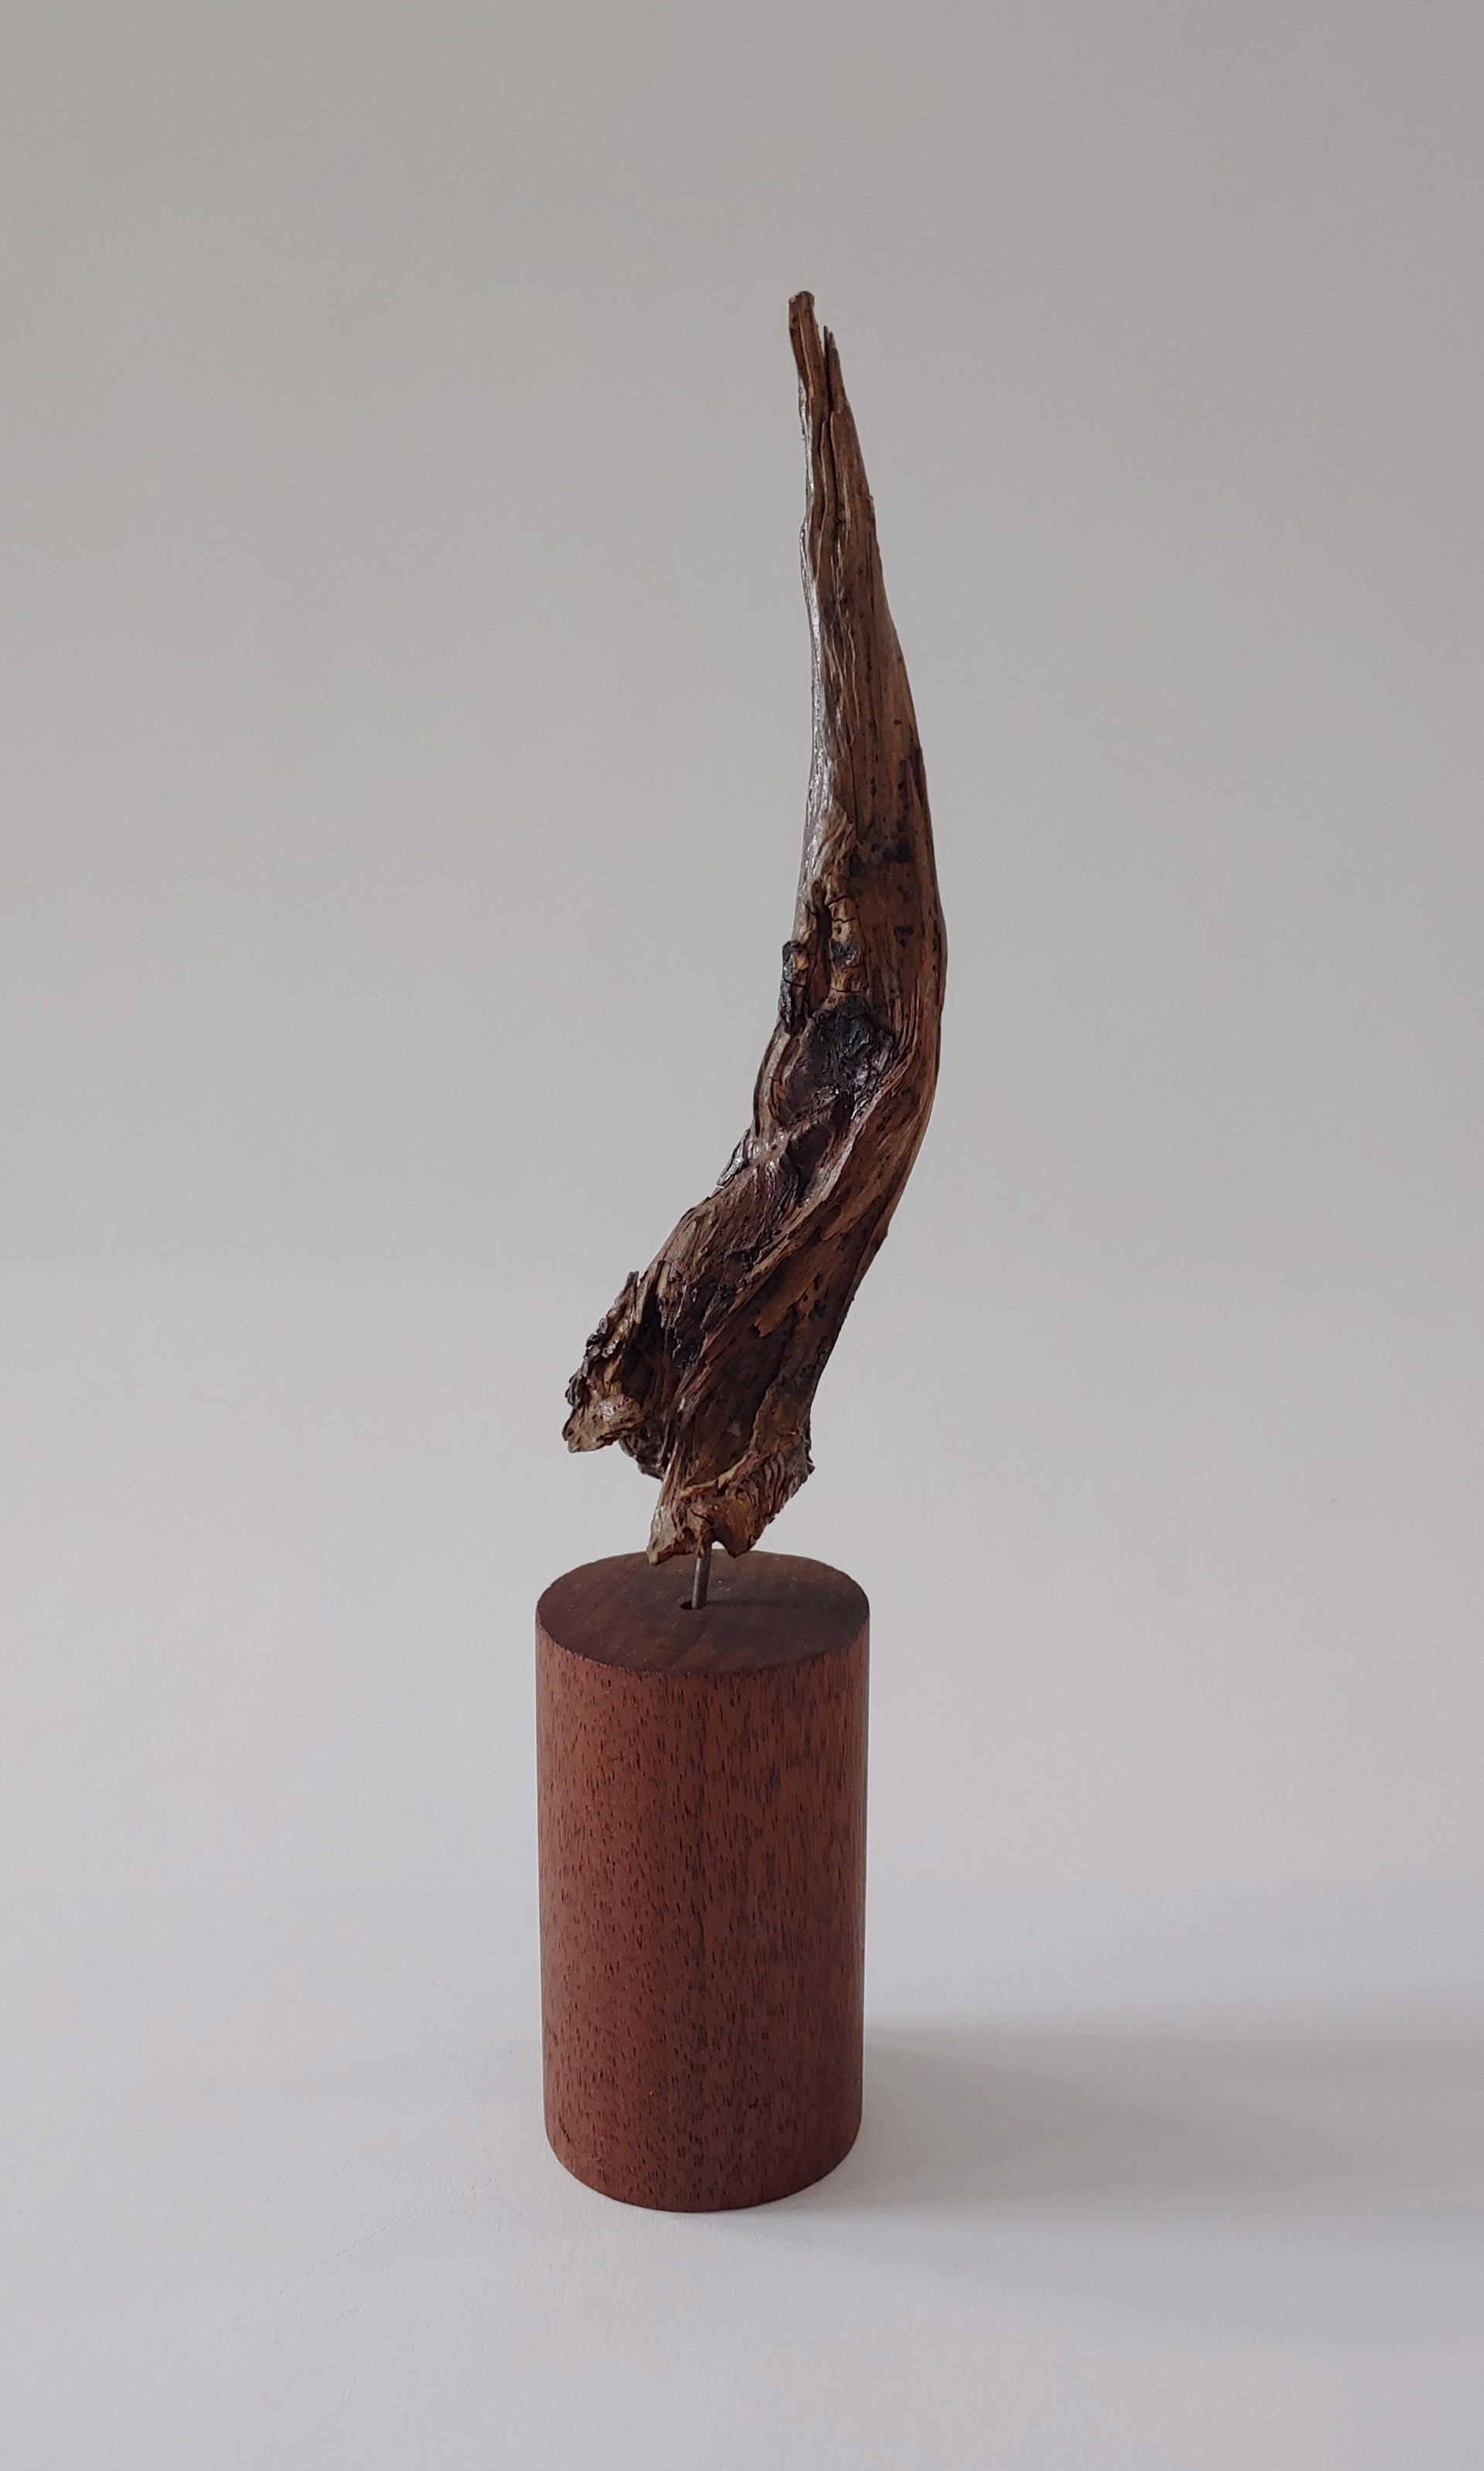 Abstract #2 - Wood Sculpture by David Amdur